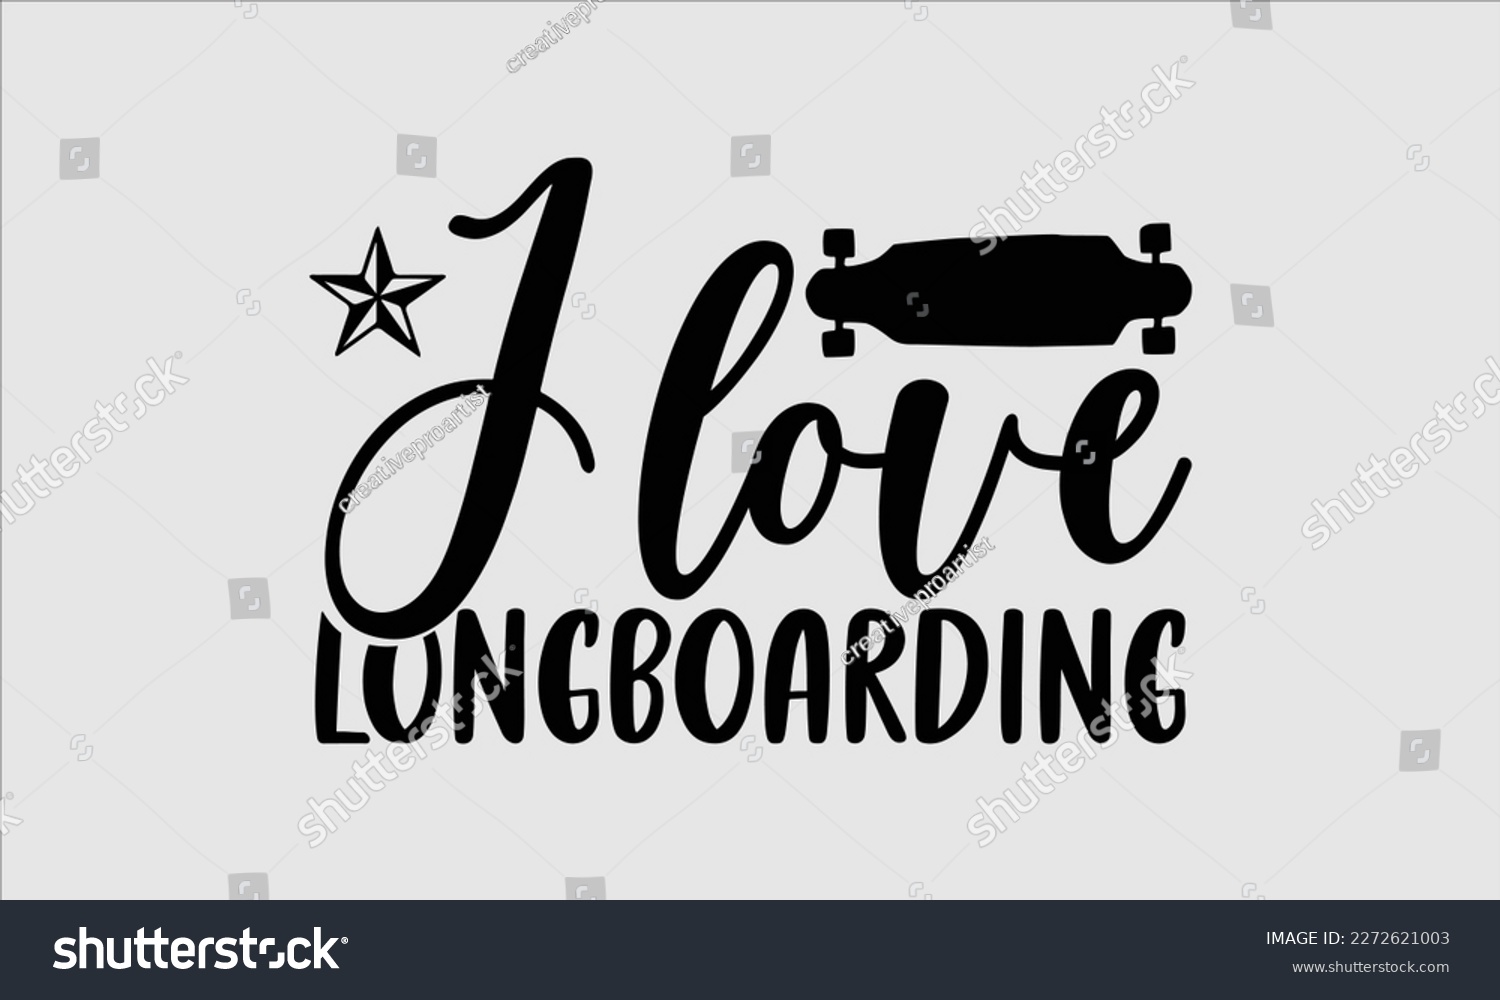 SVG of I love longboarding- Longboarding T- shirt Design, Hand drawn lettering phrase, Illustration for prints on t-shirts and bags, posters, funny eps files, svg cricut svg